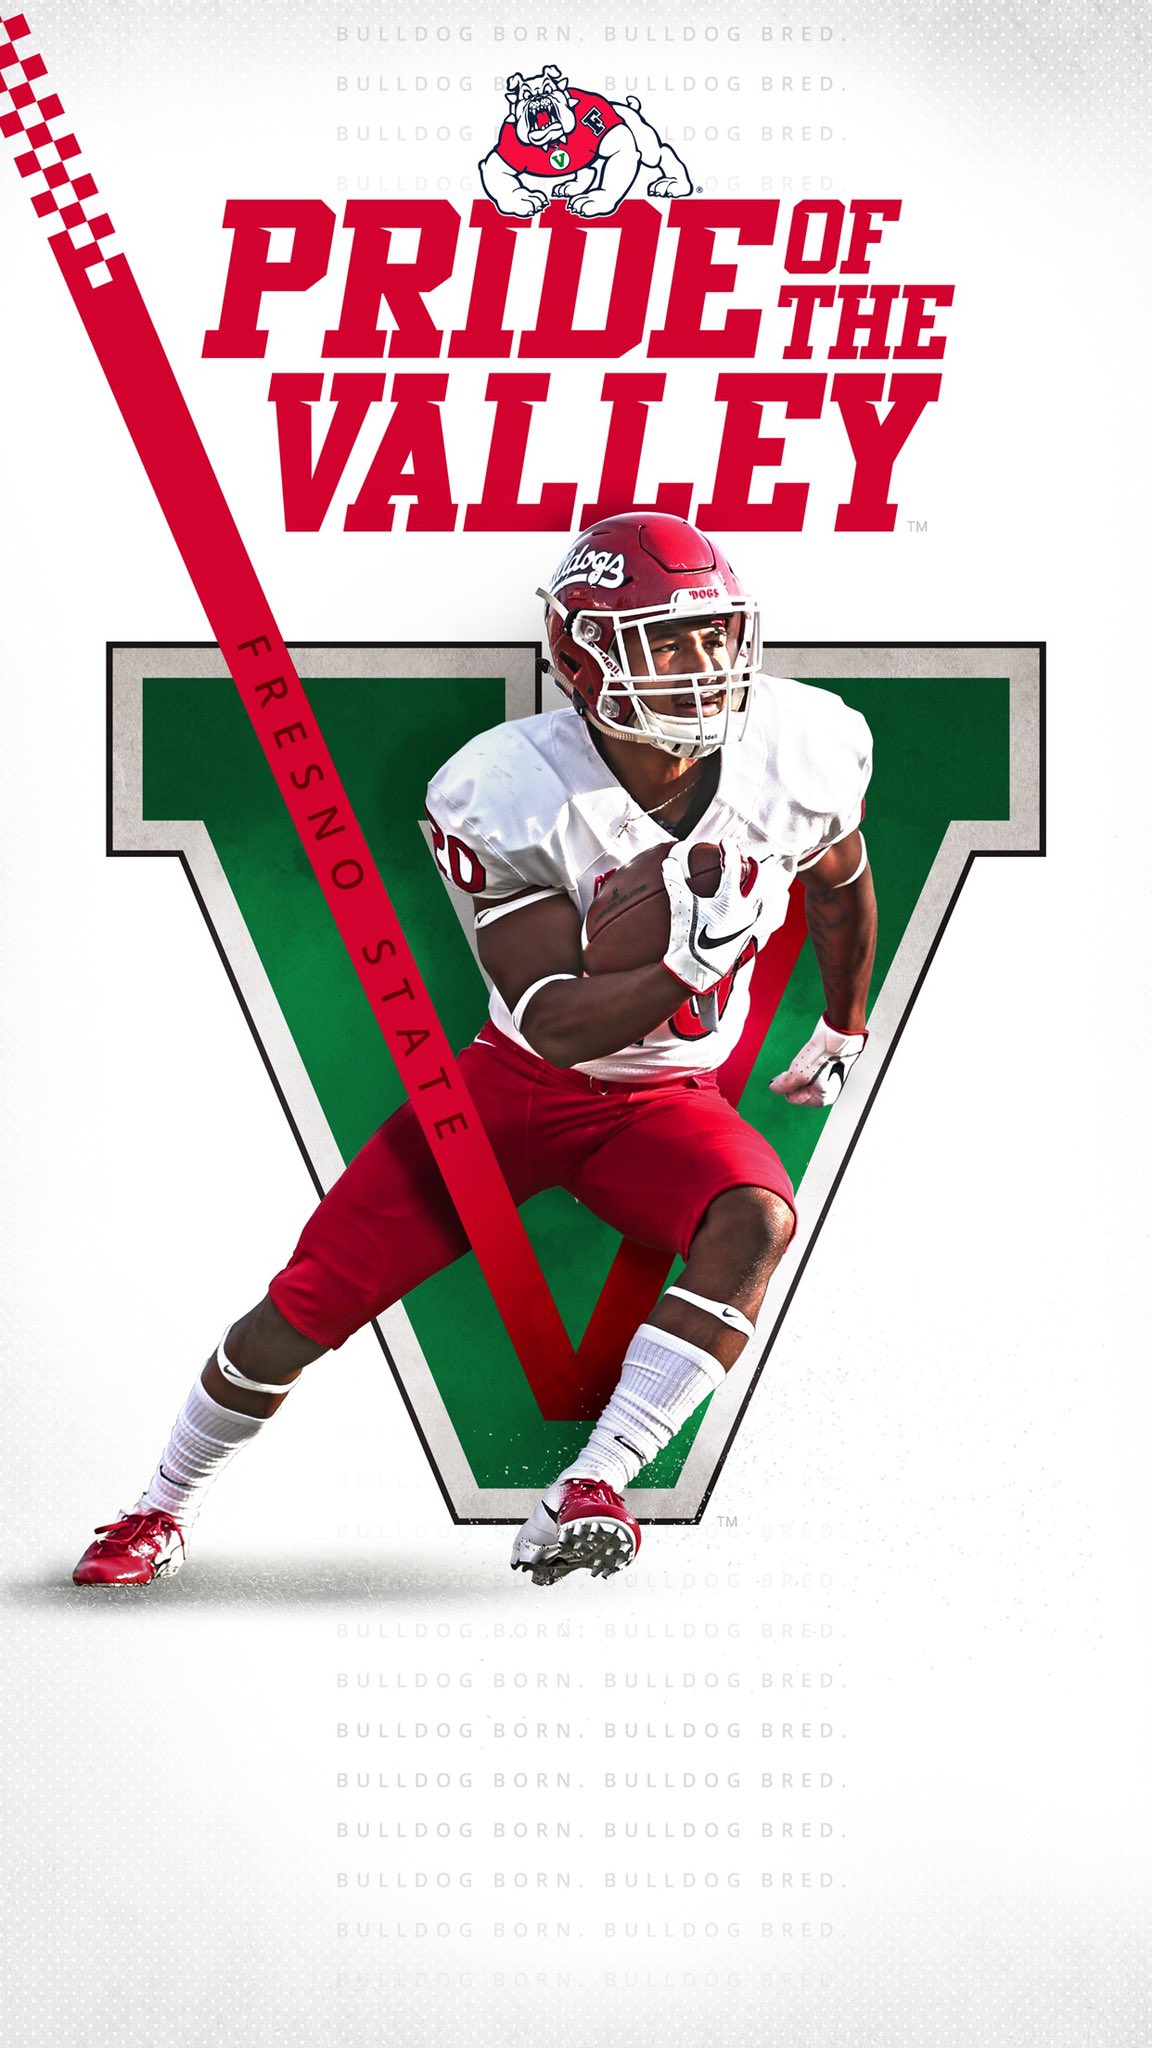 Fresno State Wallpapers